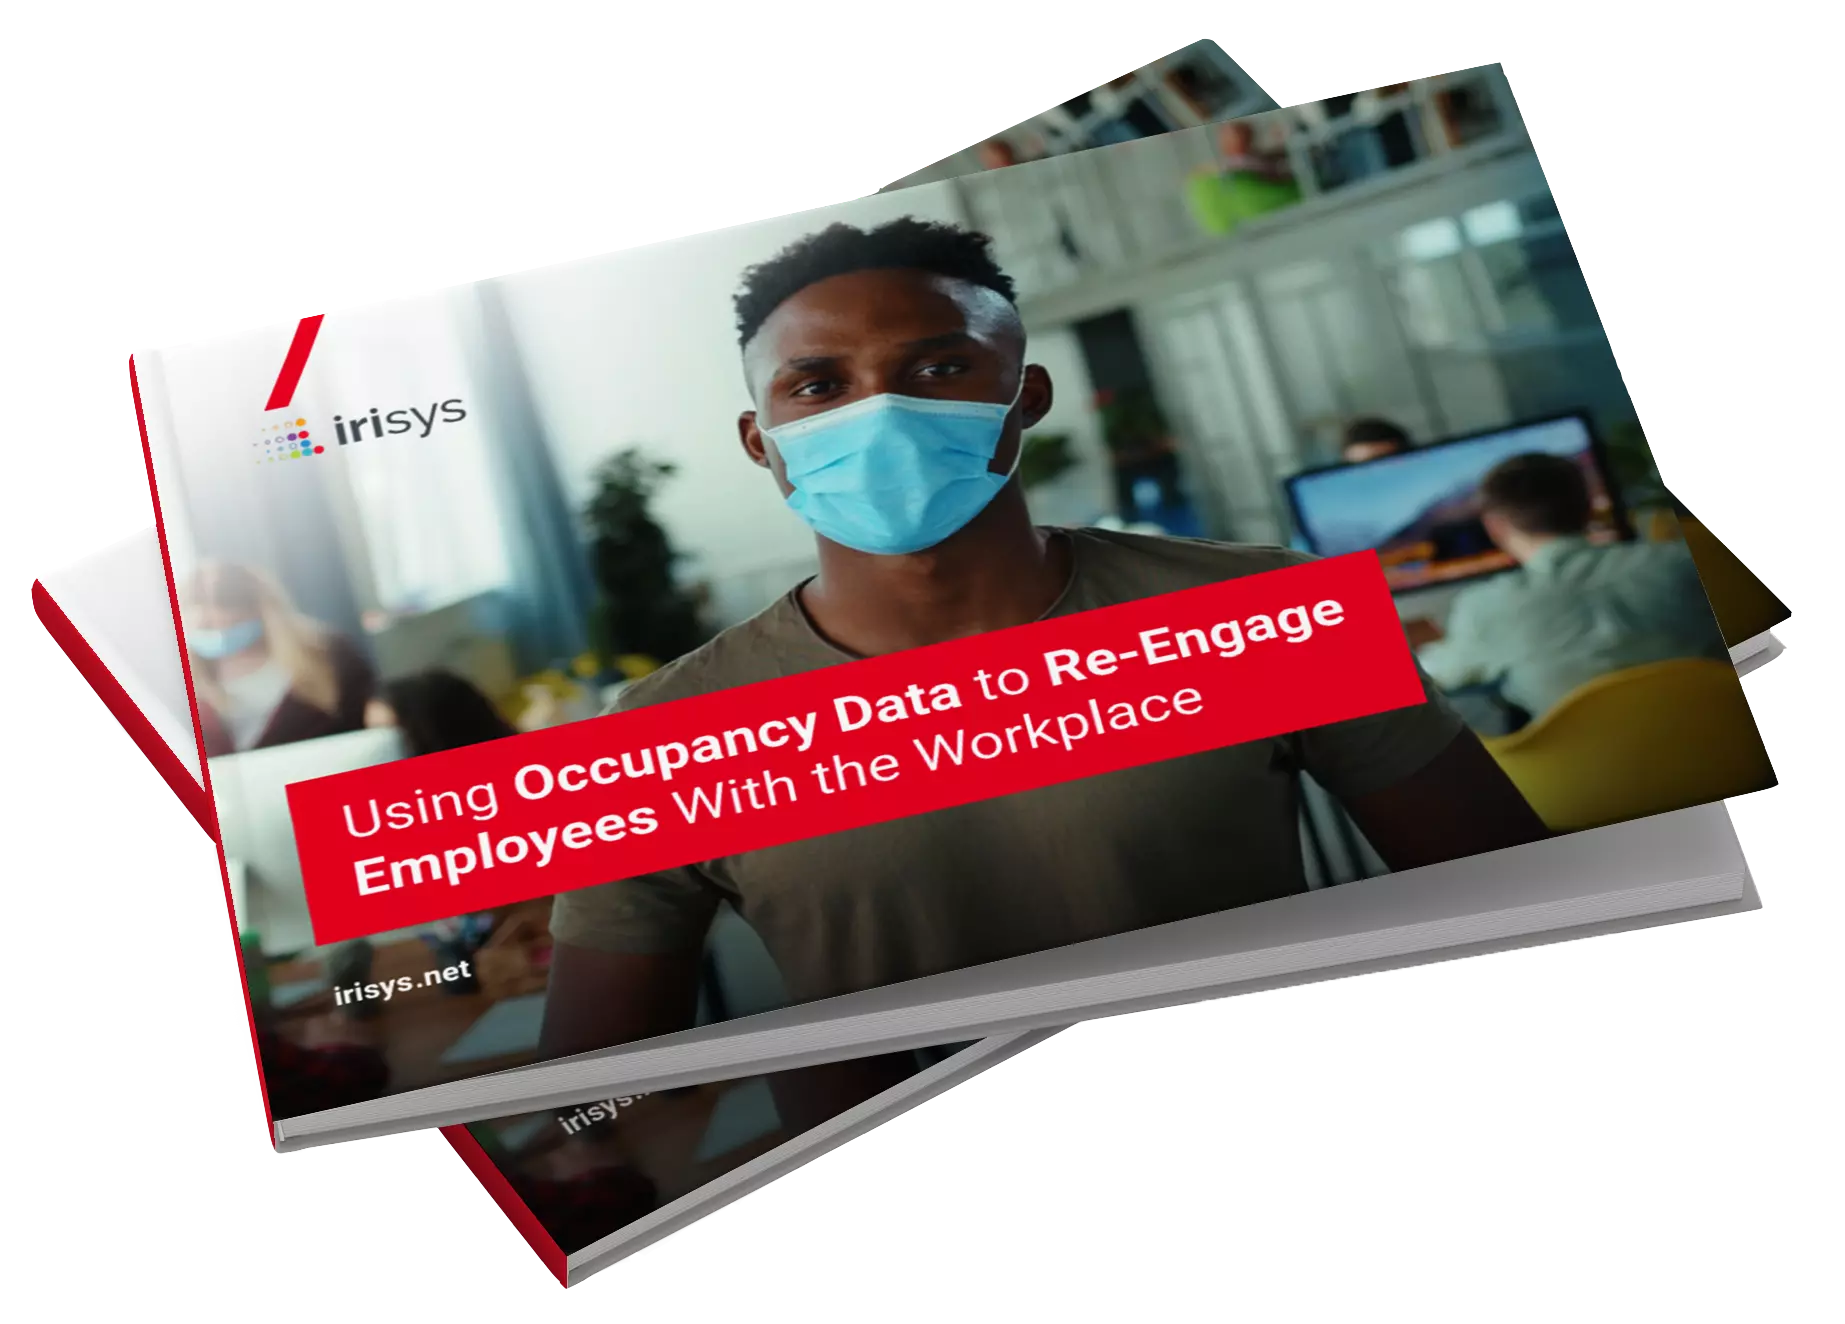 eBook - using occupancy data to re-engage employes with the workplace - no shadow - cropped